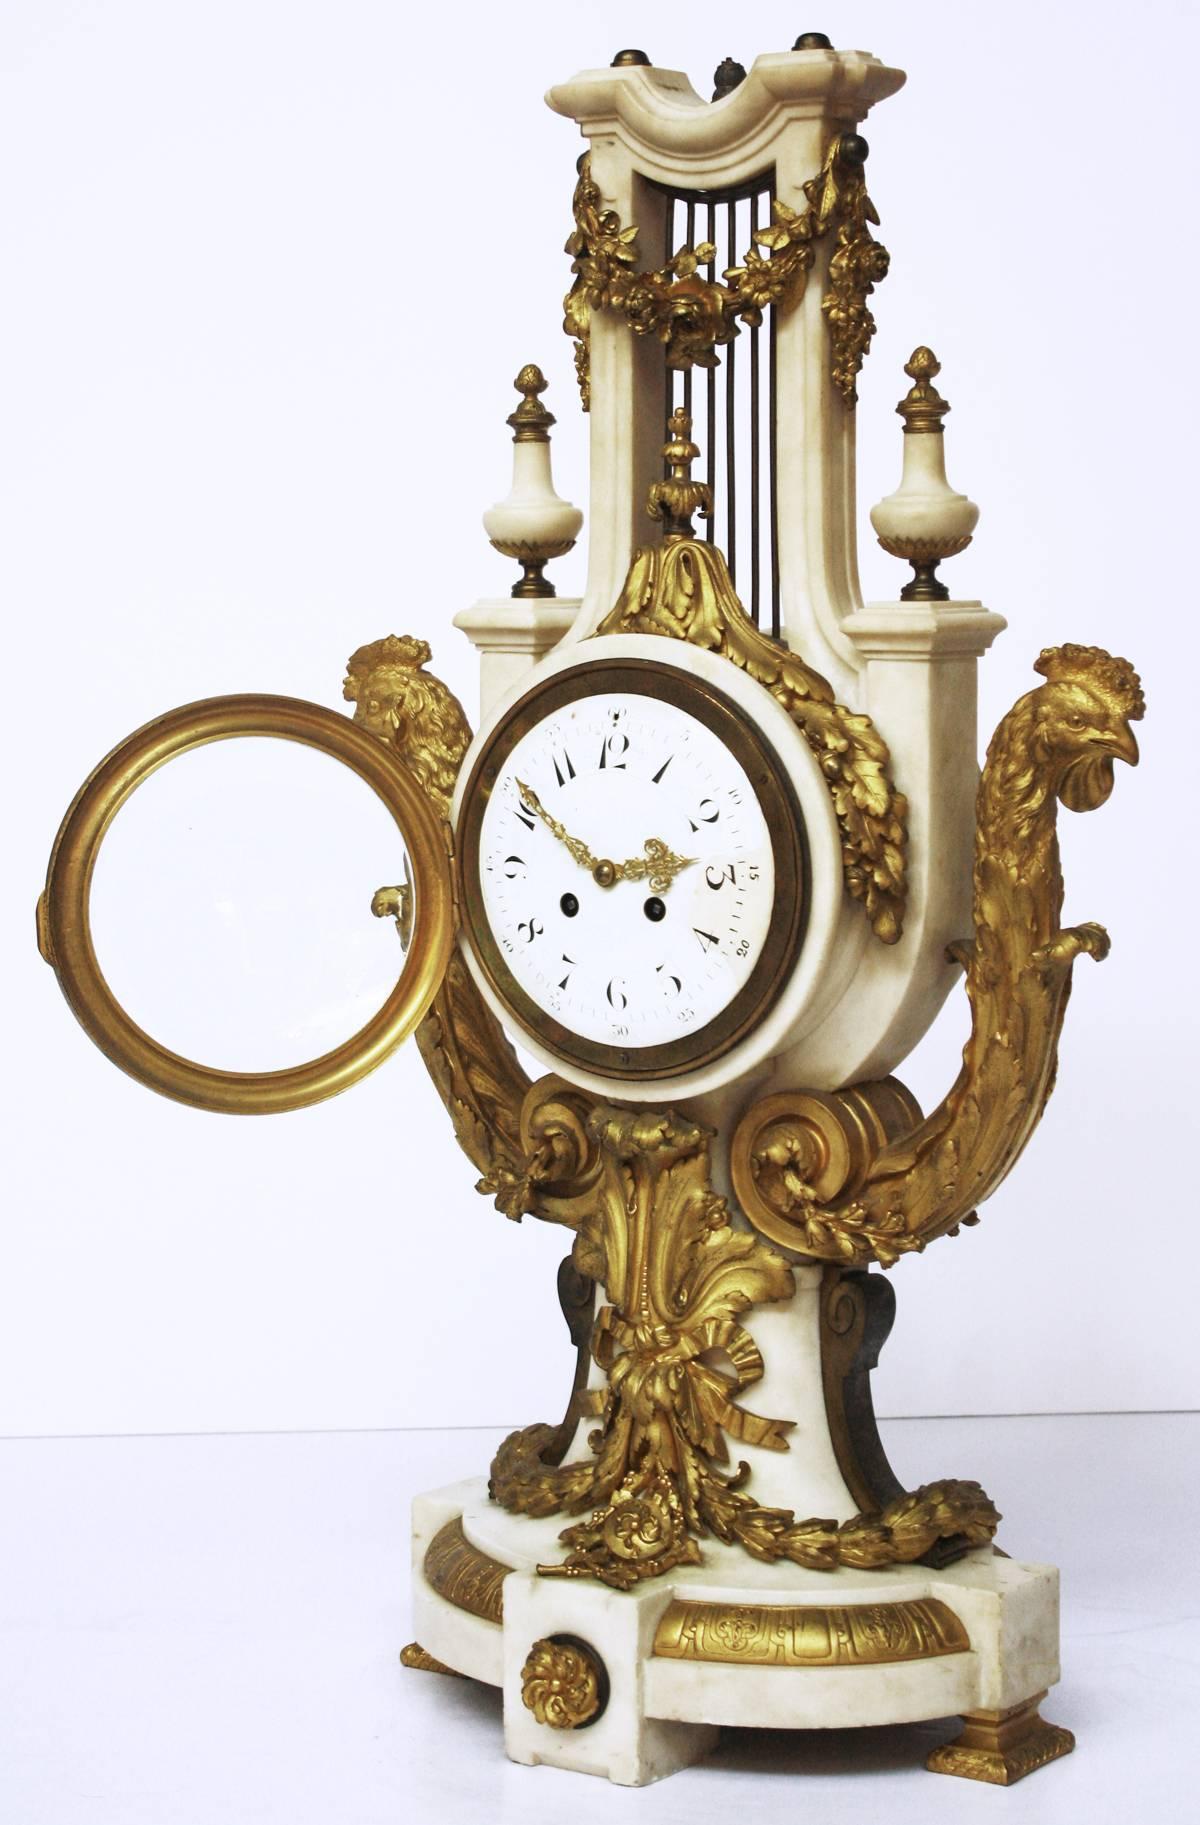 An elaborate French clock, Louis XVI-style lyre-form of marble with gilt bronze mounts: in the form of floral swags, garlands of oak leaves (with acorns), festoons of laurel leaves, cock's heads, acanthus leaves, ribbons and bows, the marble base is